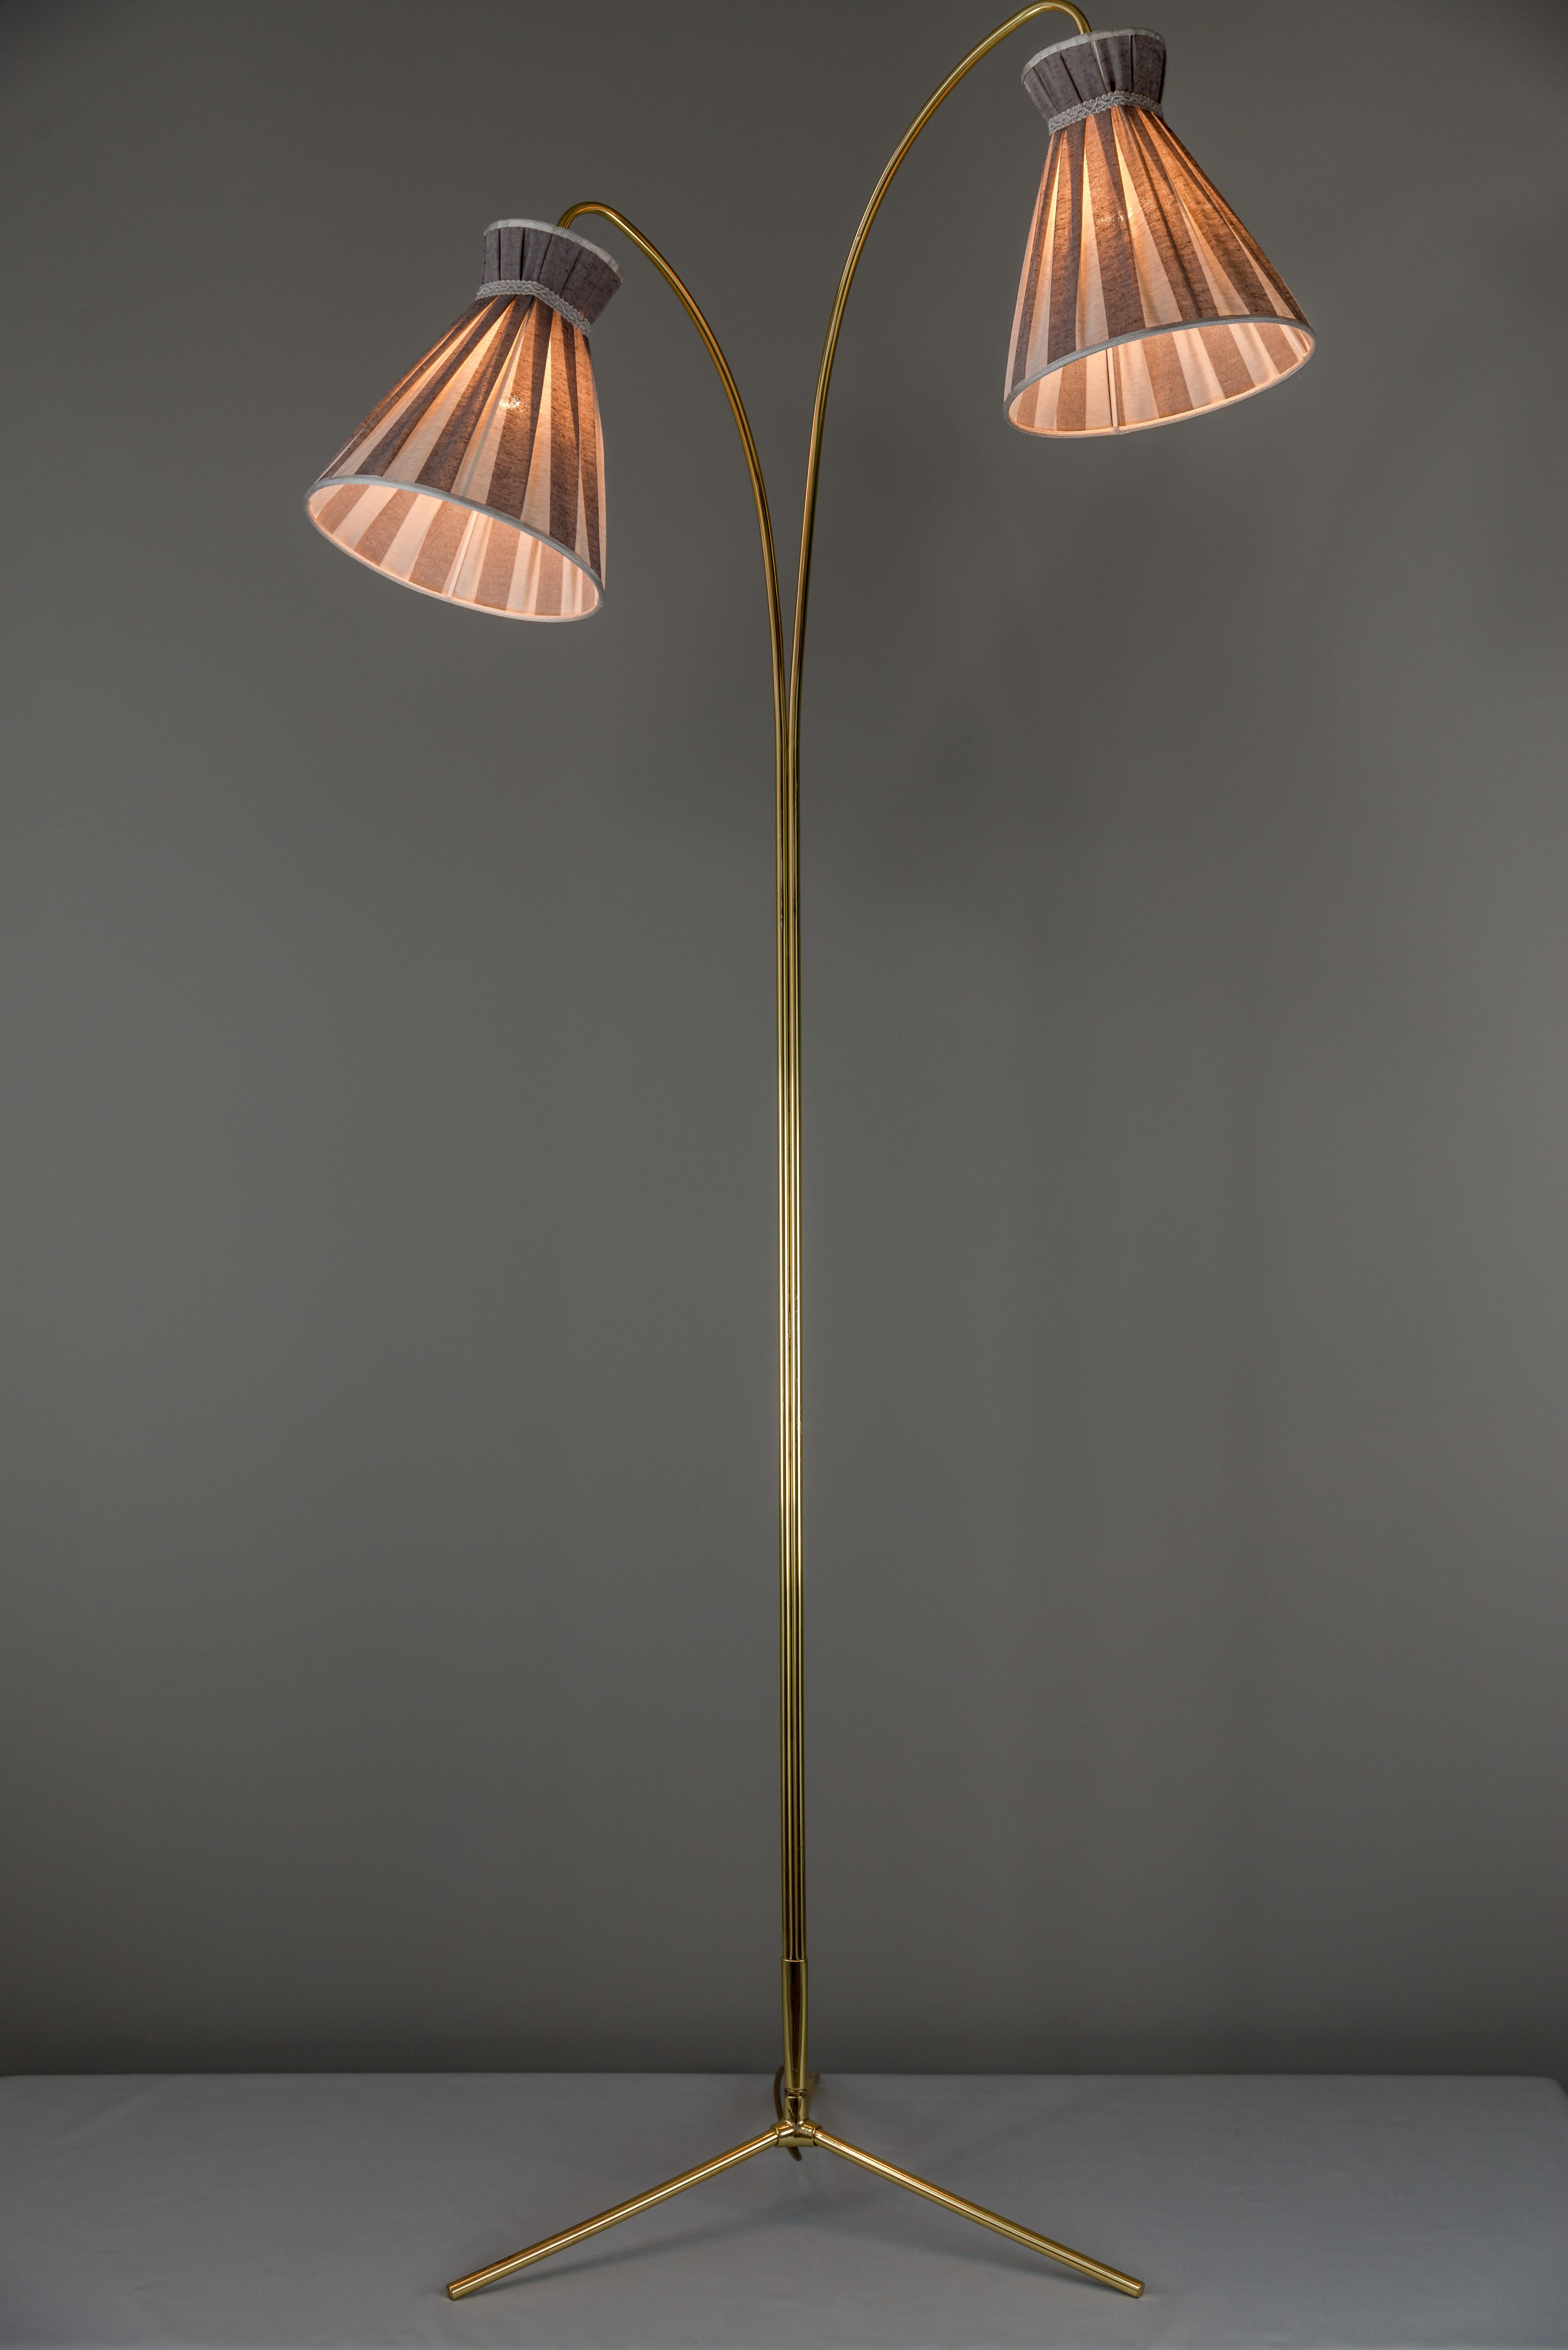 Floor lamp by Rupert Nikoll, circa 1950
Polished and stove enameled
The shades are replaced (new)
It is possible to turn on or off the left or right light separately.